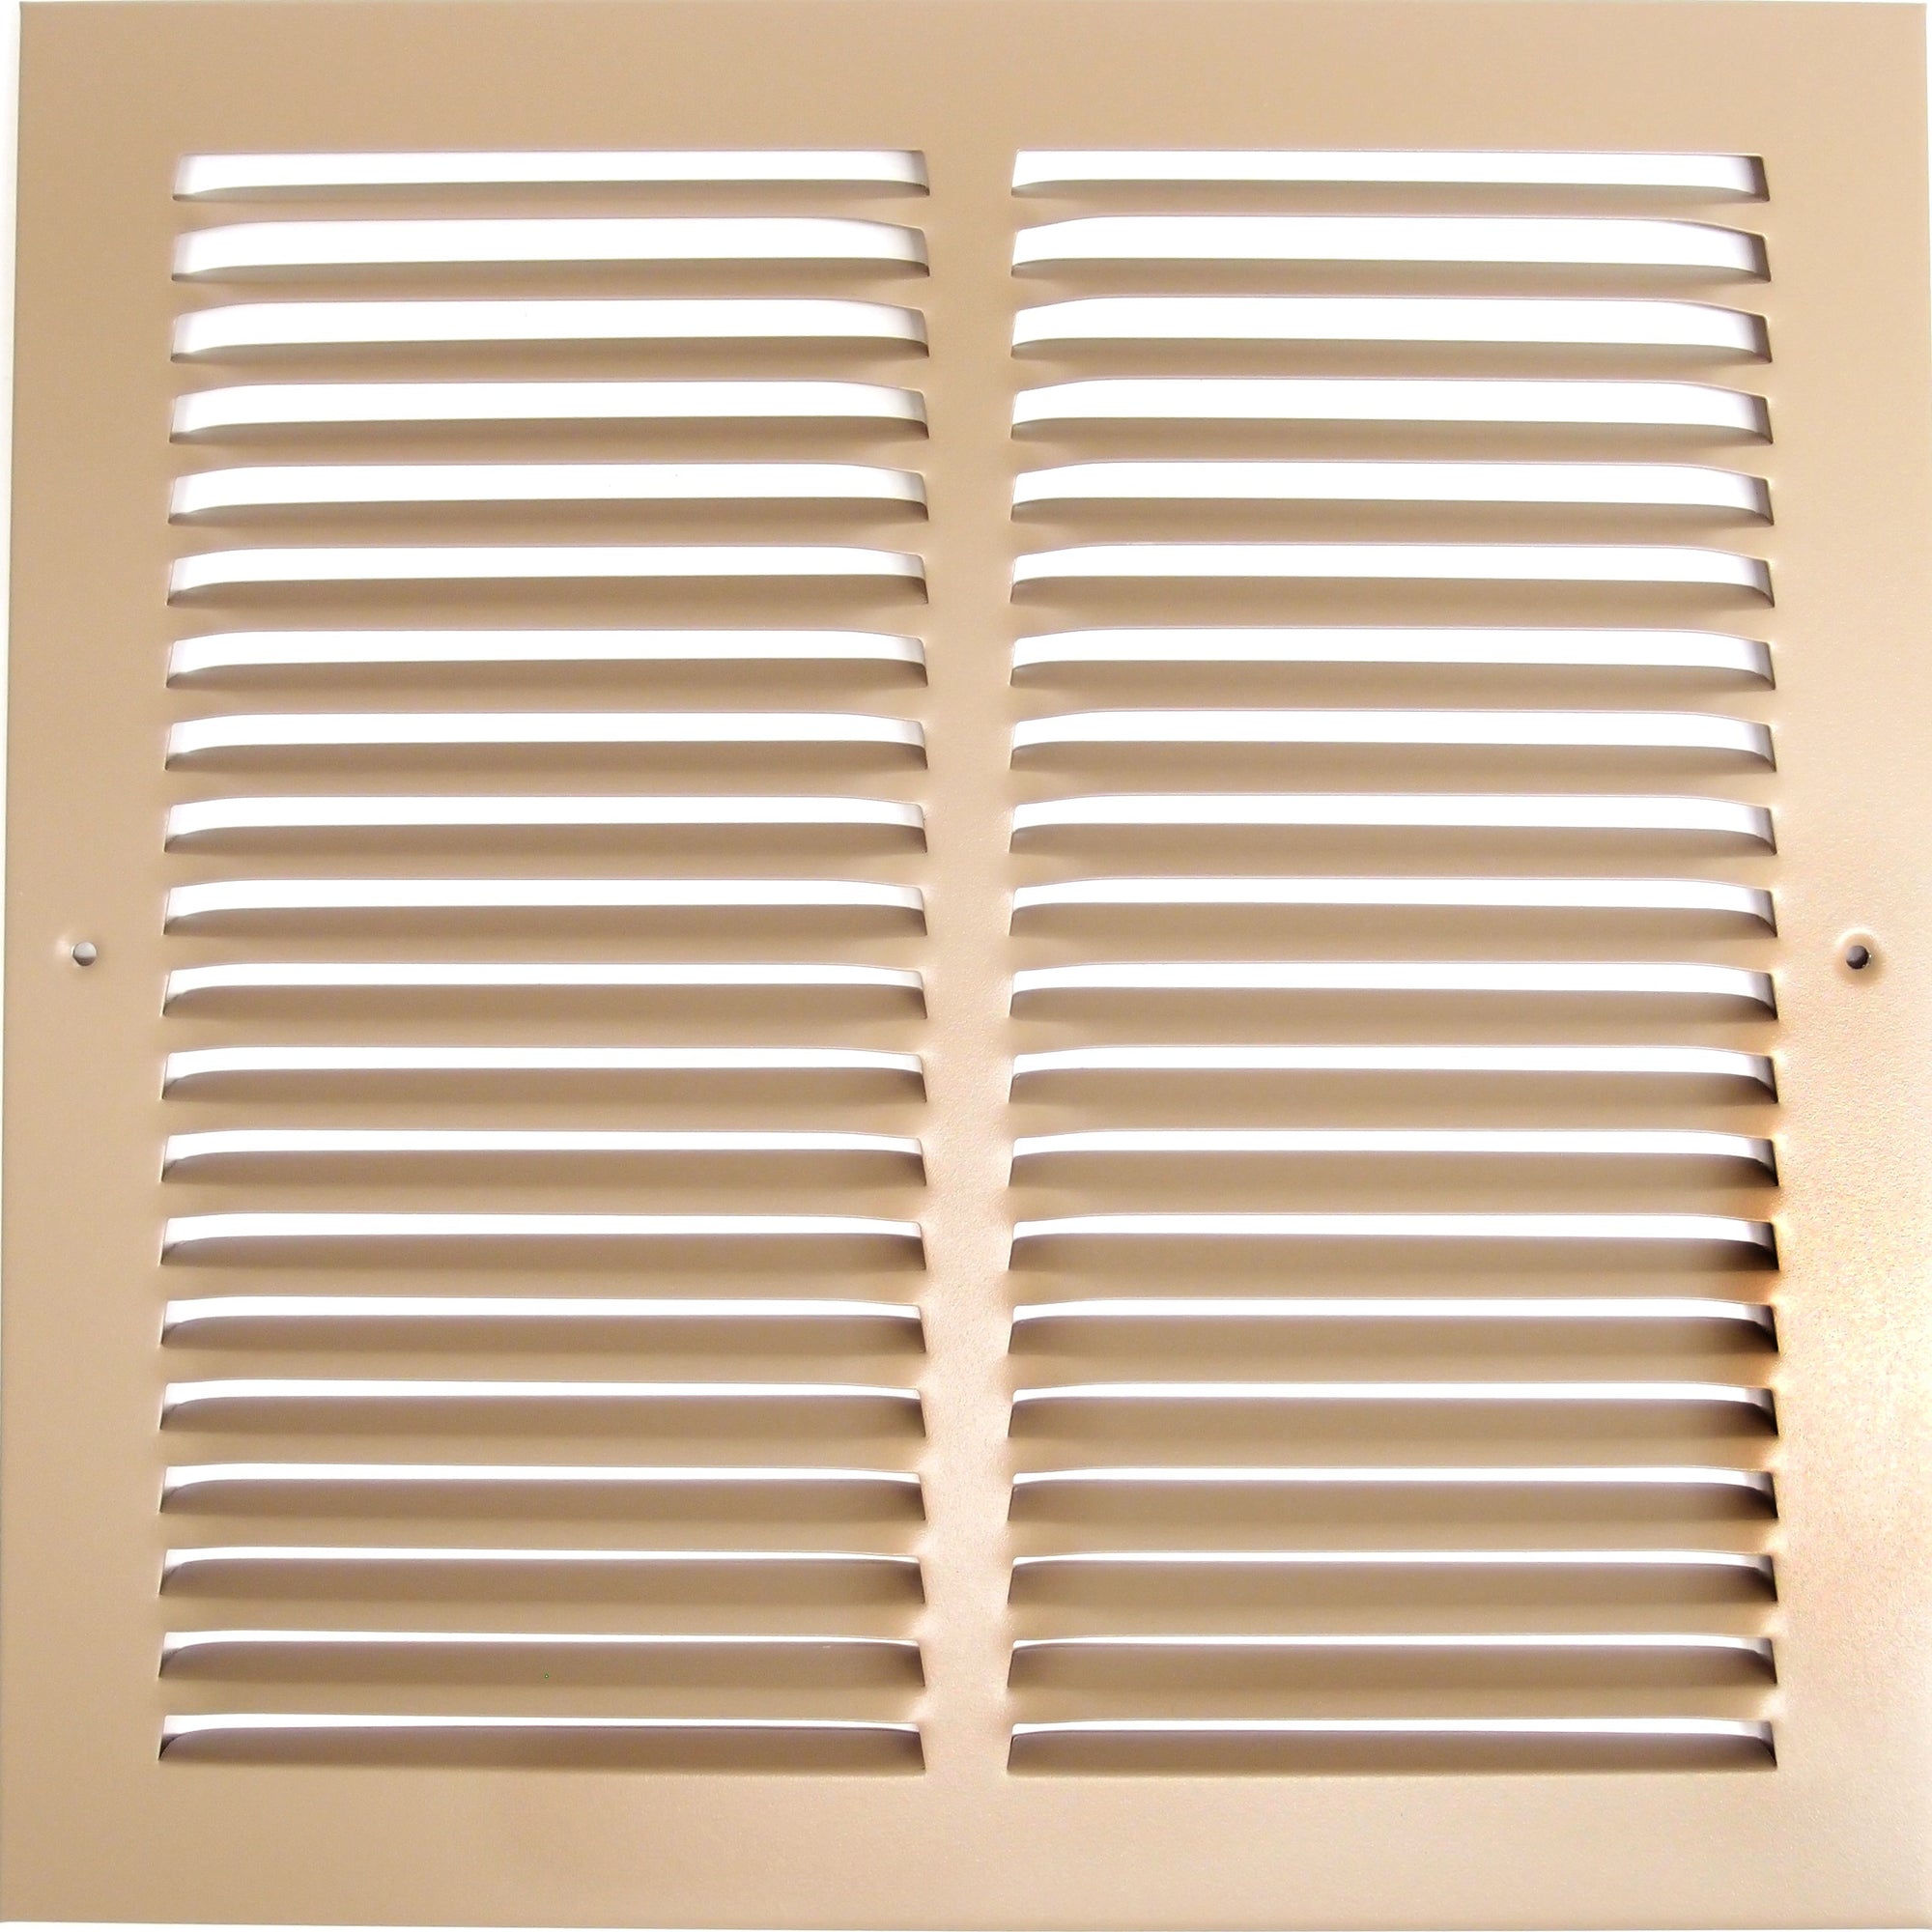 14" X 14" Air Vent Return Grilles - Sidewall and Ceiling - Steel